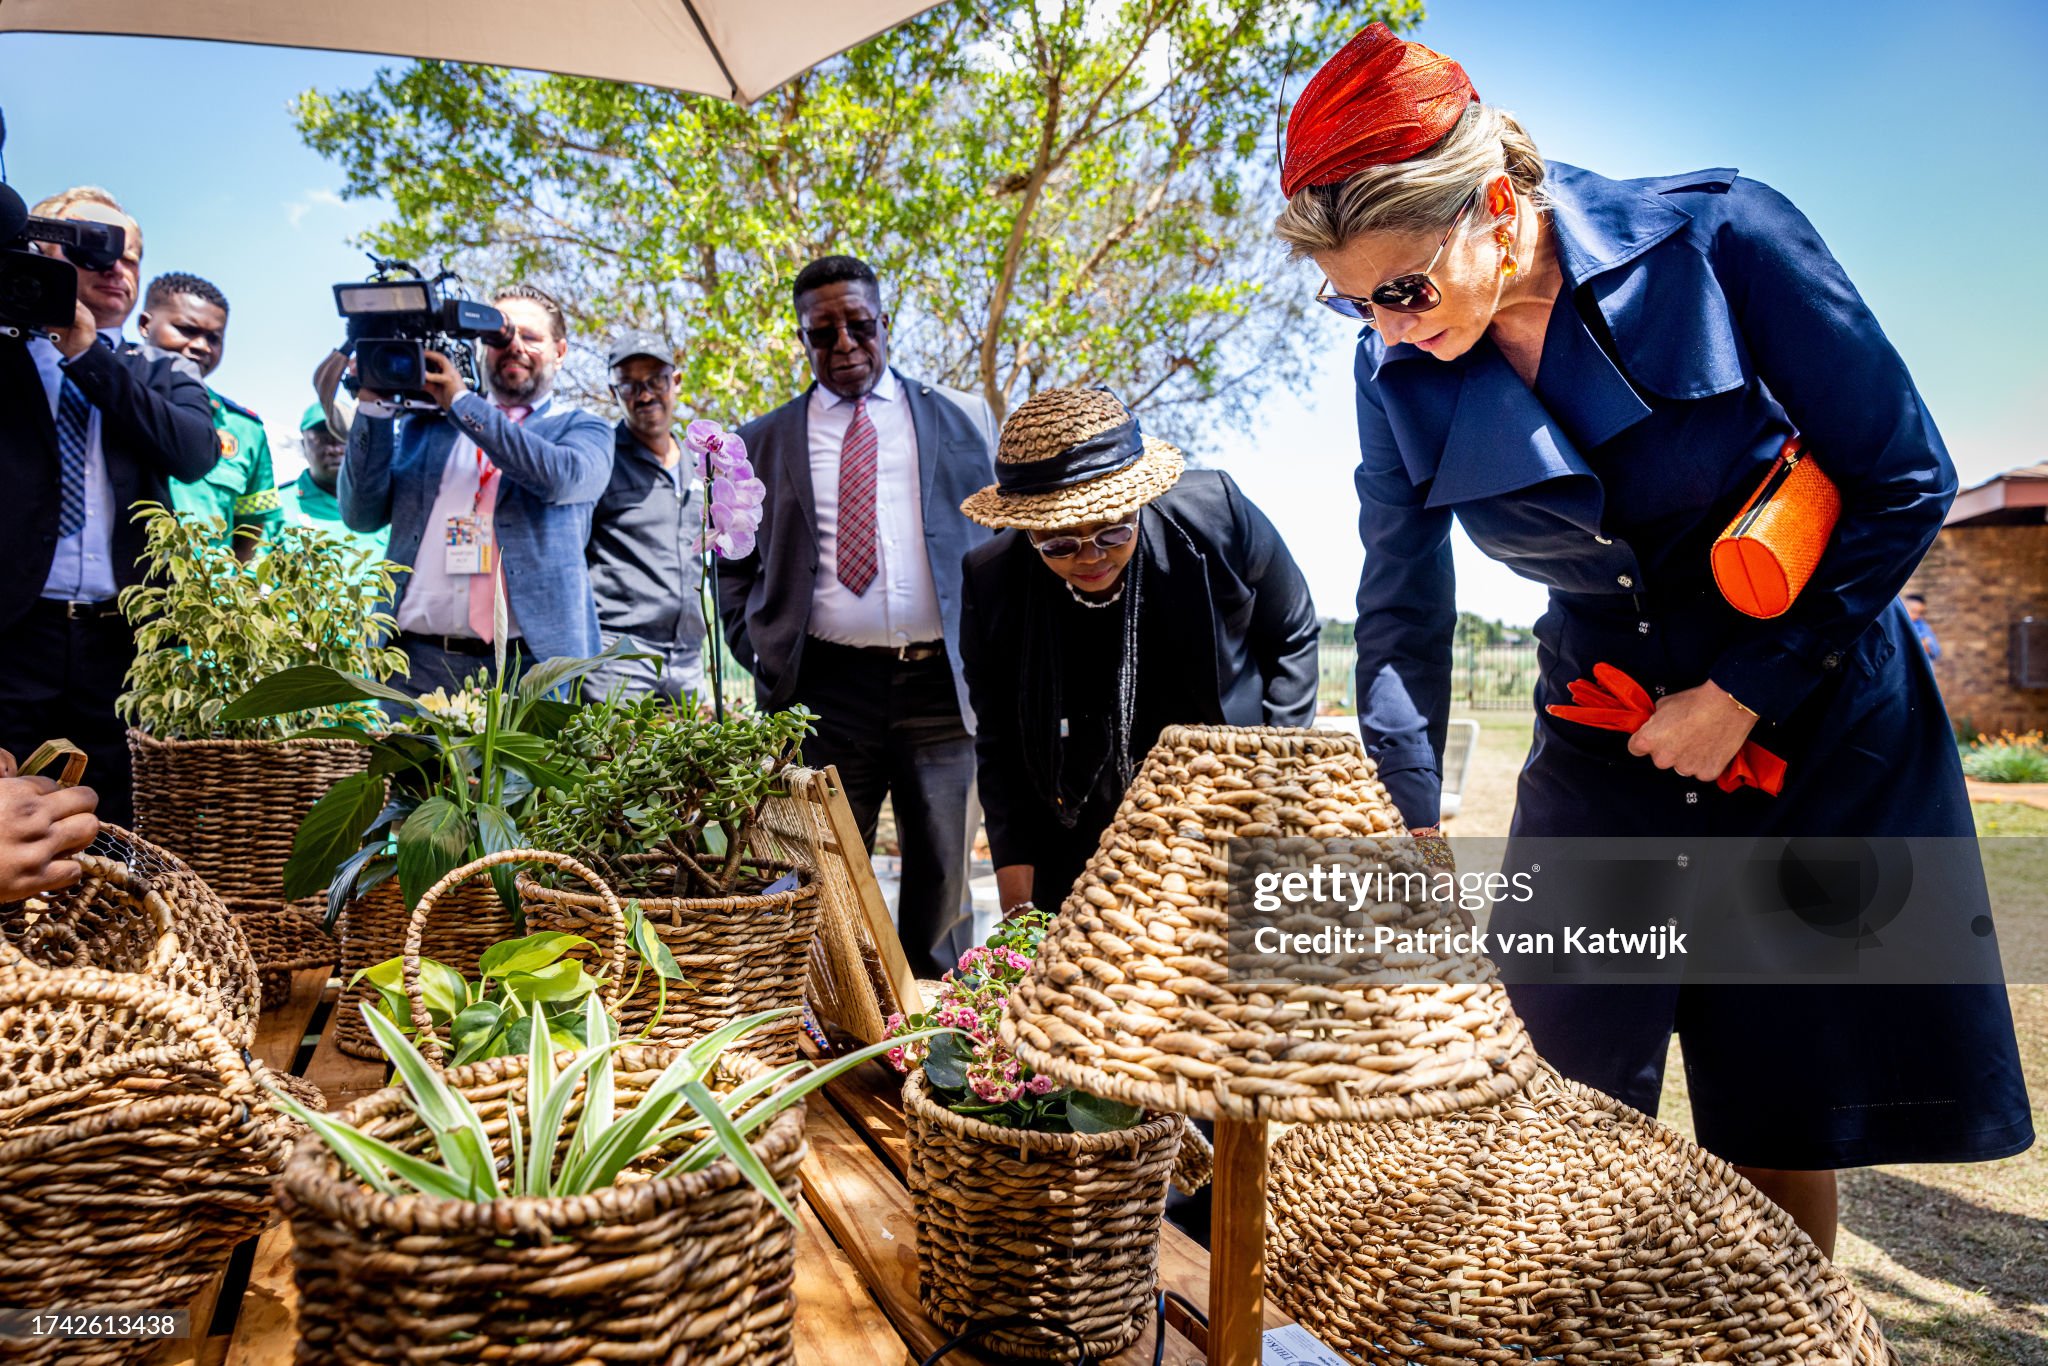 CASA REAL HOLANDESA - Página 100 Queen-maxima-of-the-netherlands-visits-the-blesbokspruit-wetland-reserve-on-the-first-day-of